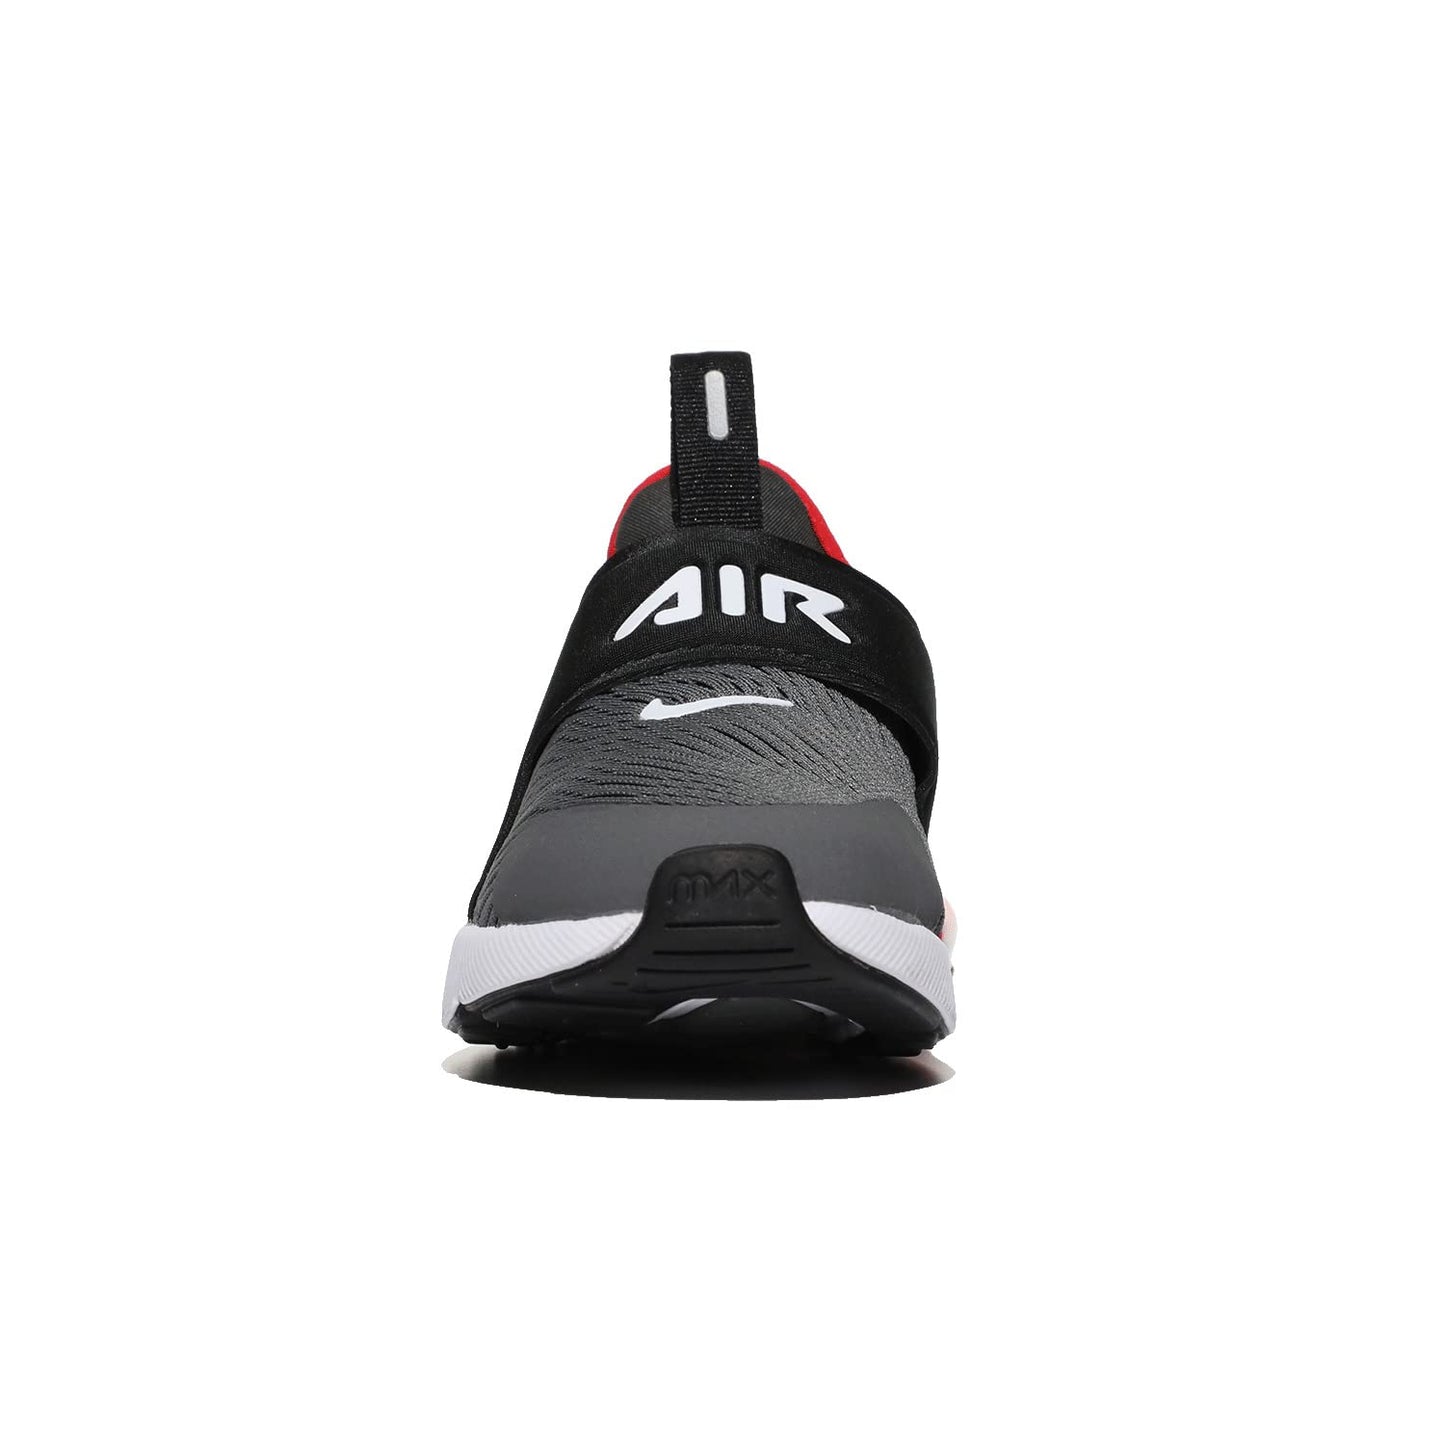 Image 6 of Air Max 270 Extreme (Little Kid)